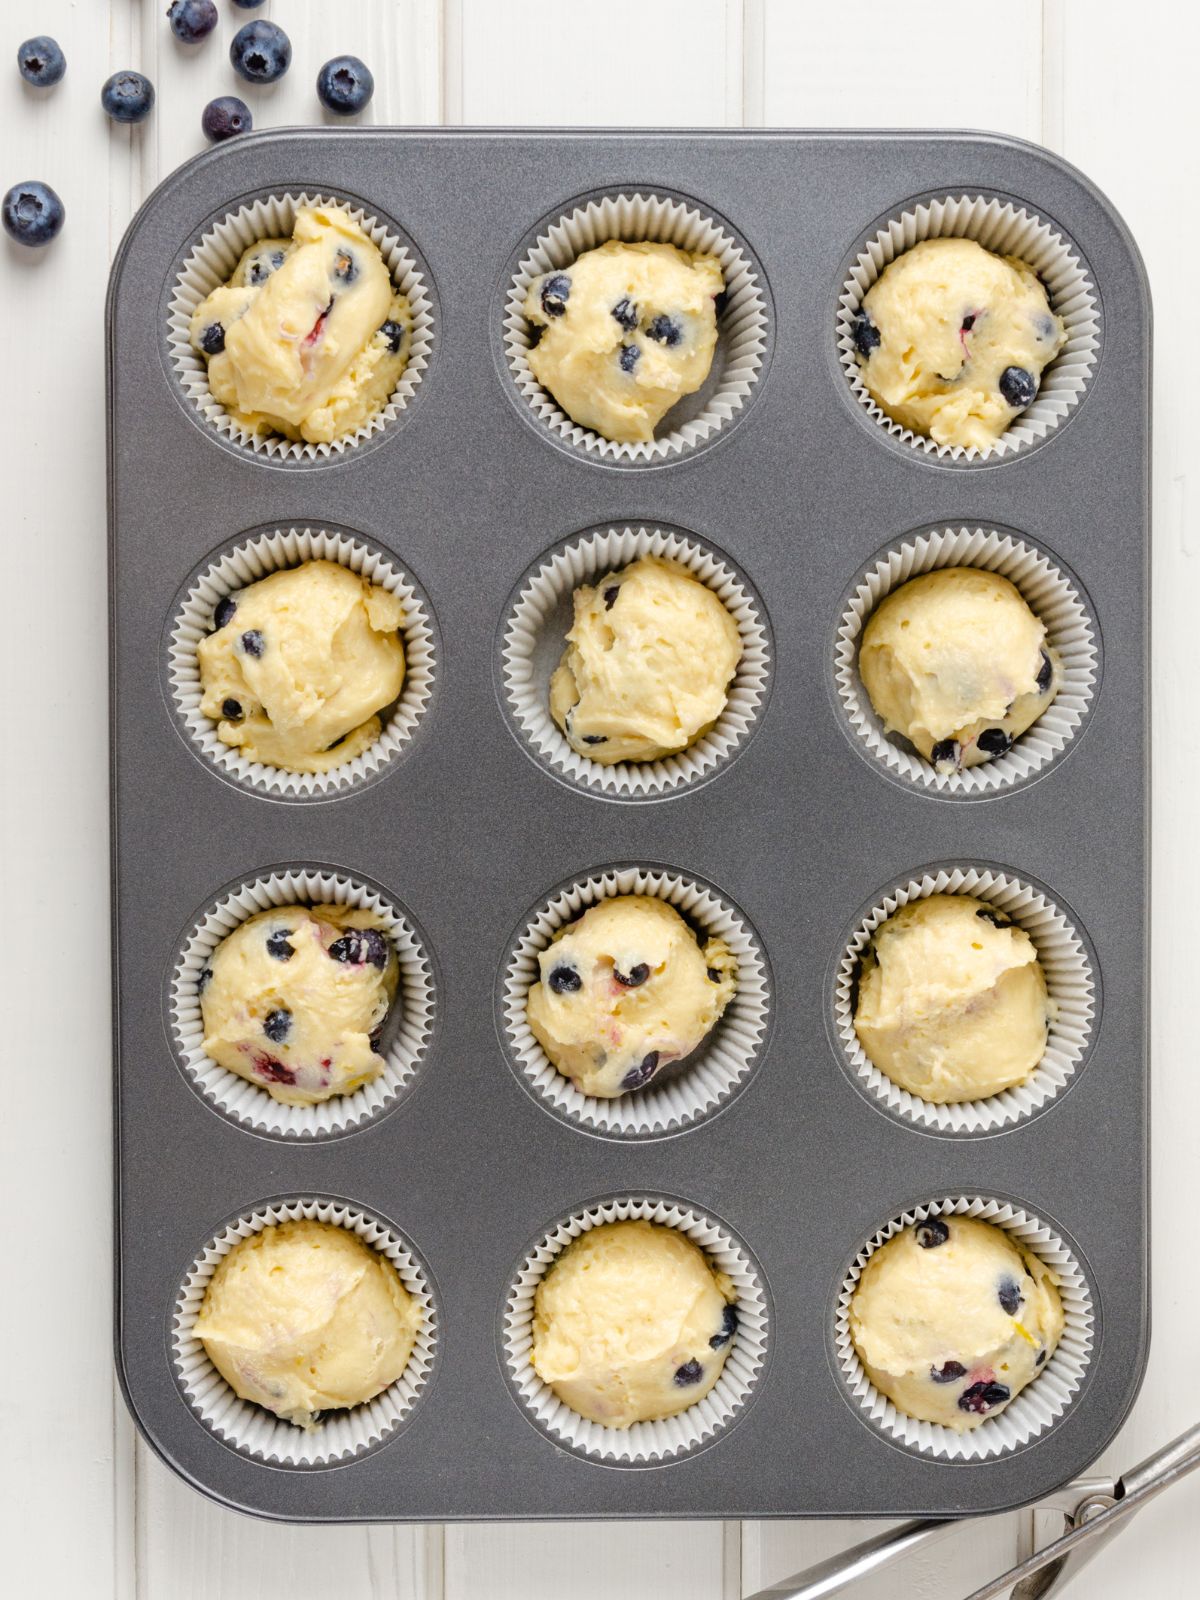 blueberry muffins in pan.